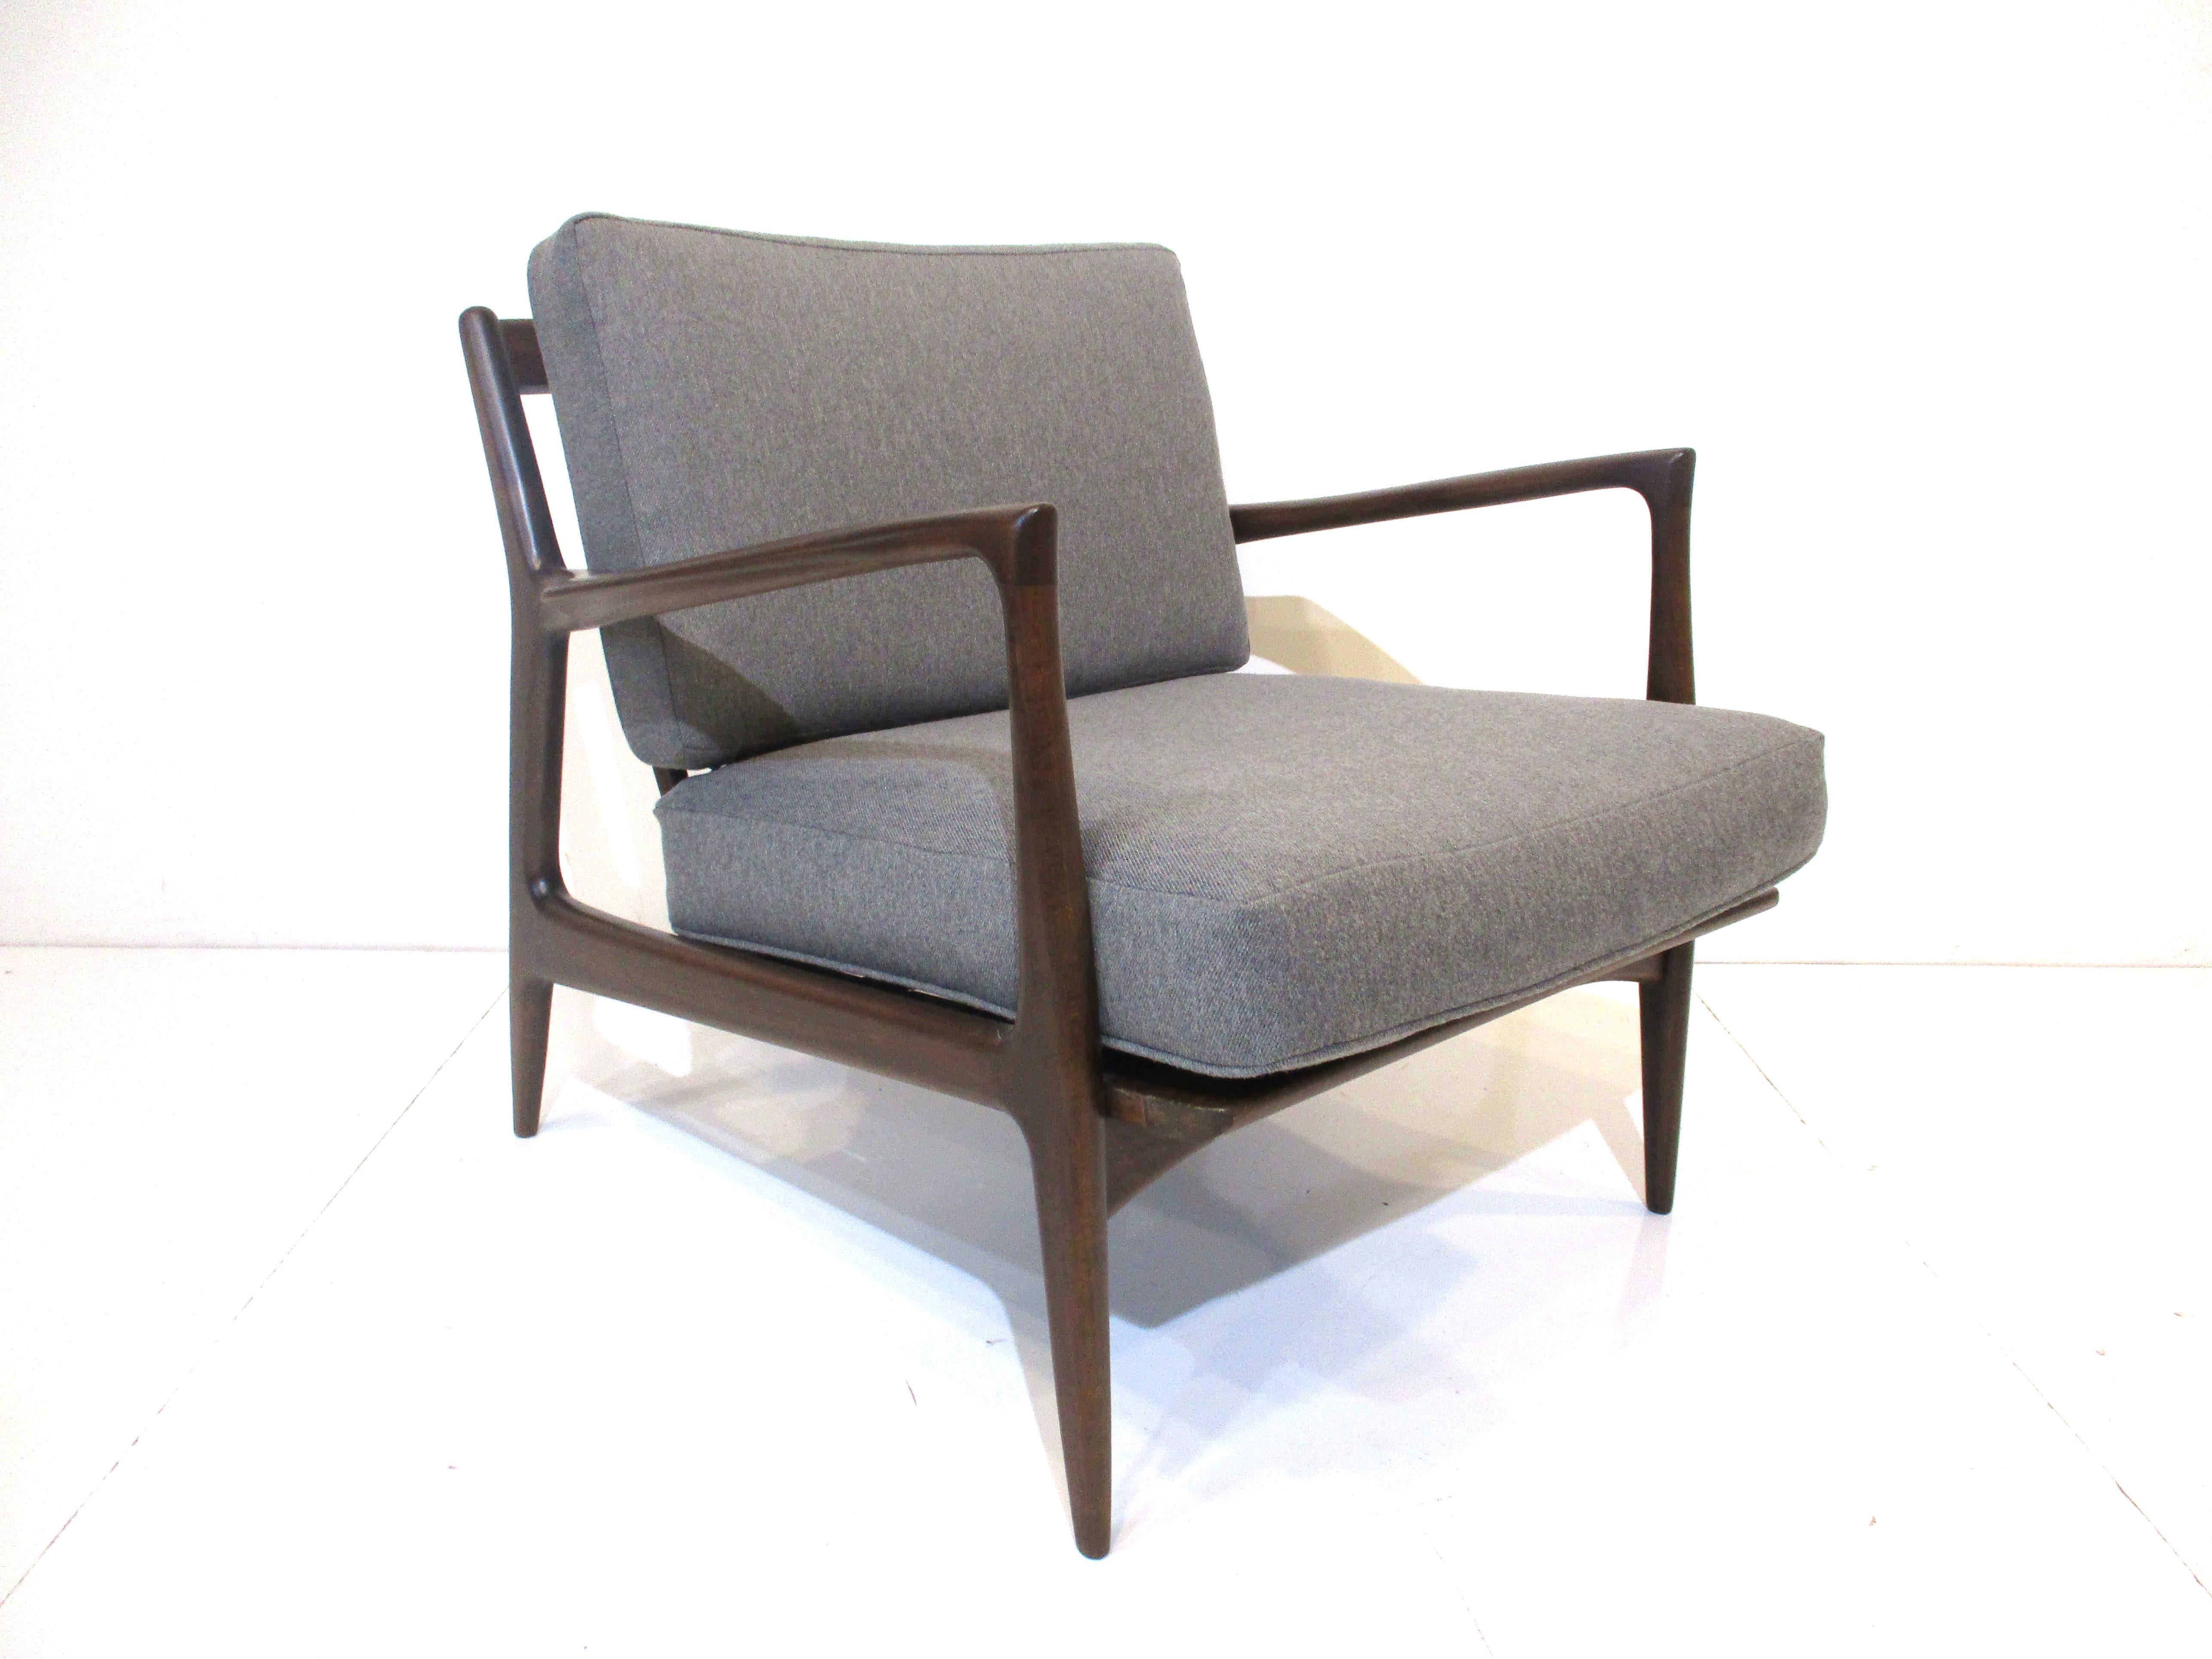 A dark walnut toned sculptural wood framed lounge chair with two loose upholstered cushions in a nice warm gray woven fabric . Designed by Ib Kofod Larsen made in Denmark and imported by the Selig furniture company . Very well crafted , designed and